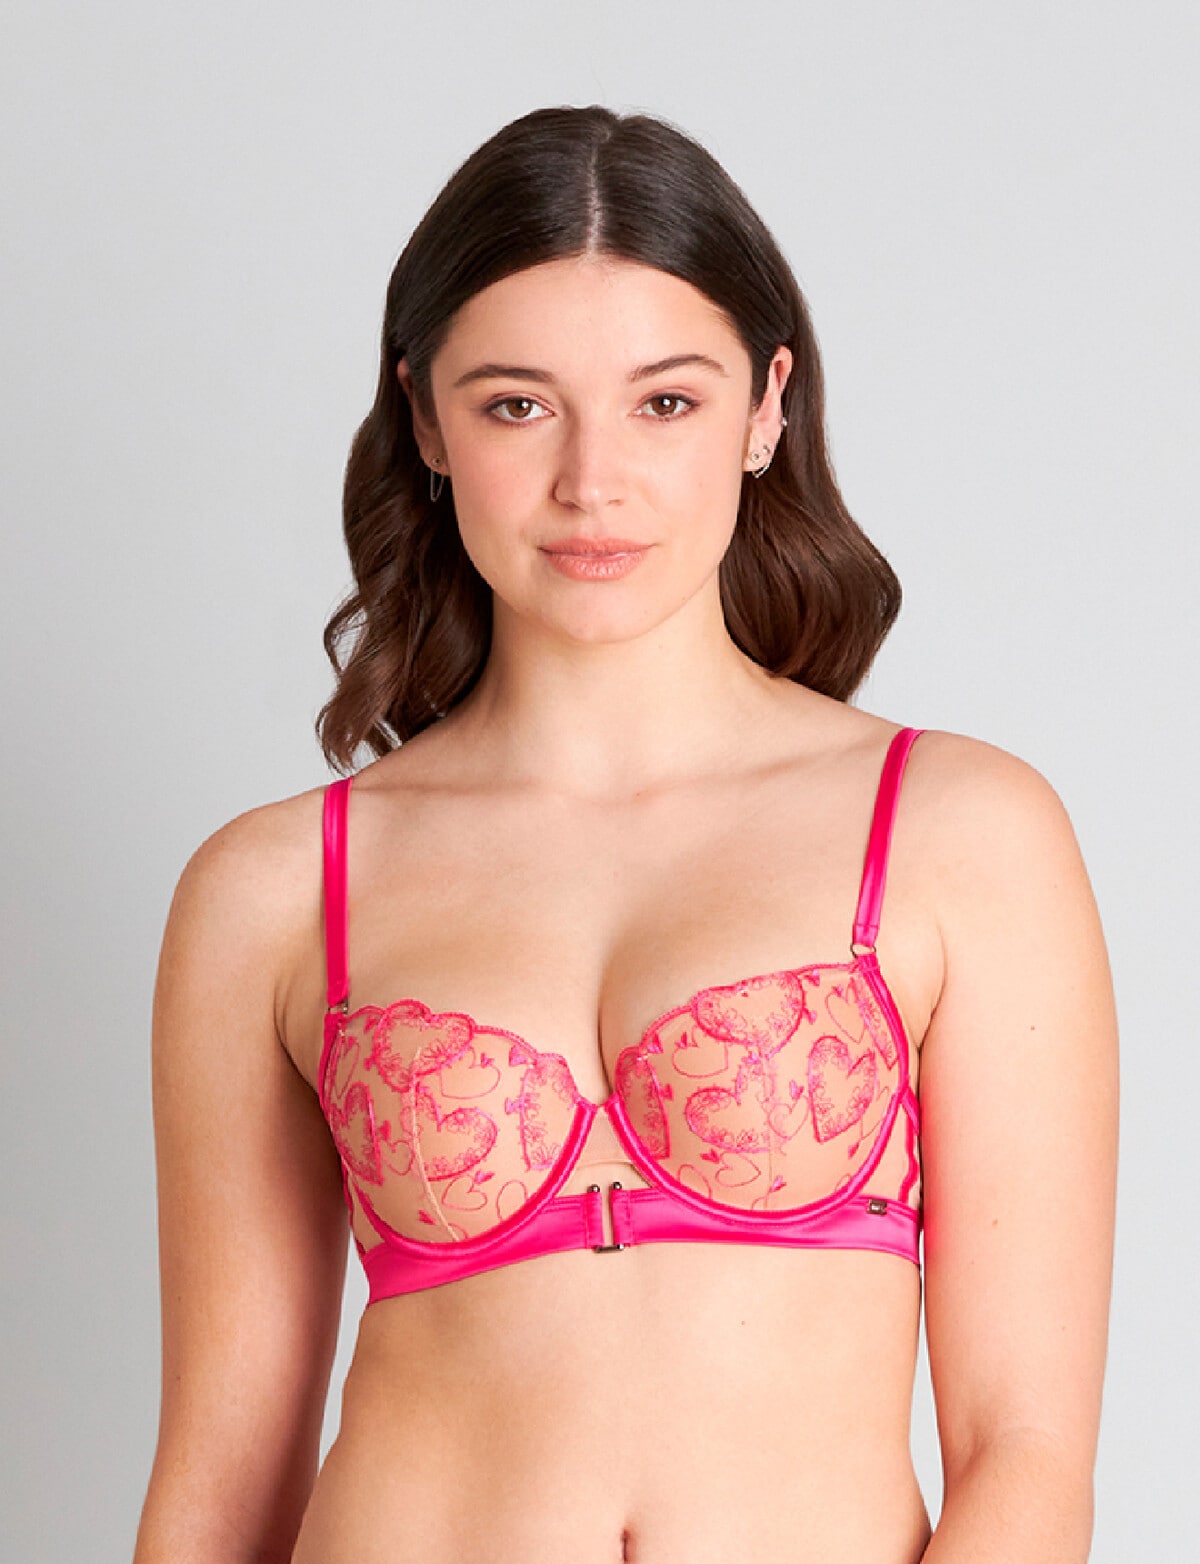 me by Bendon Only Me Underwire Bra in Black/Tuscany